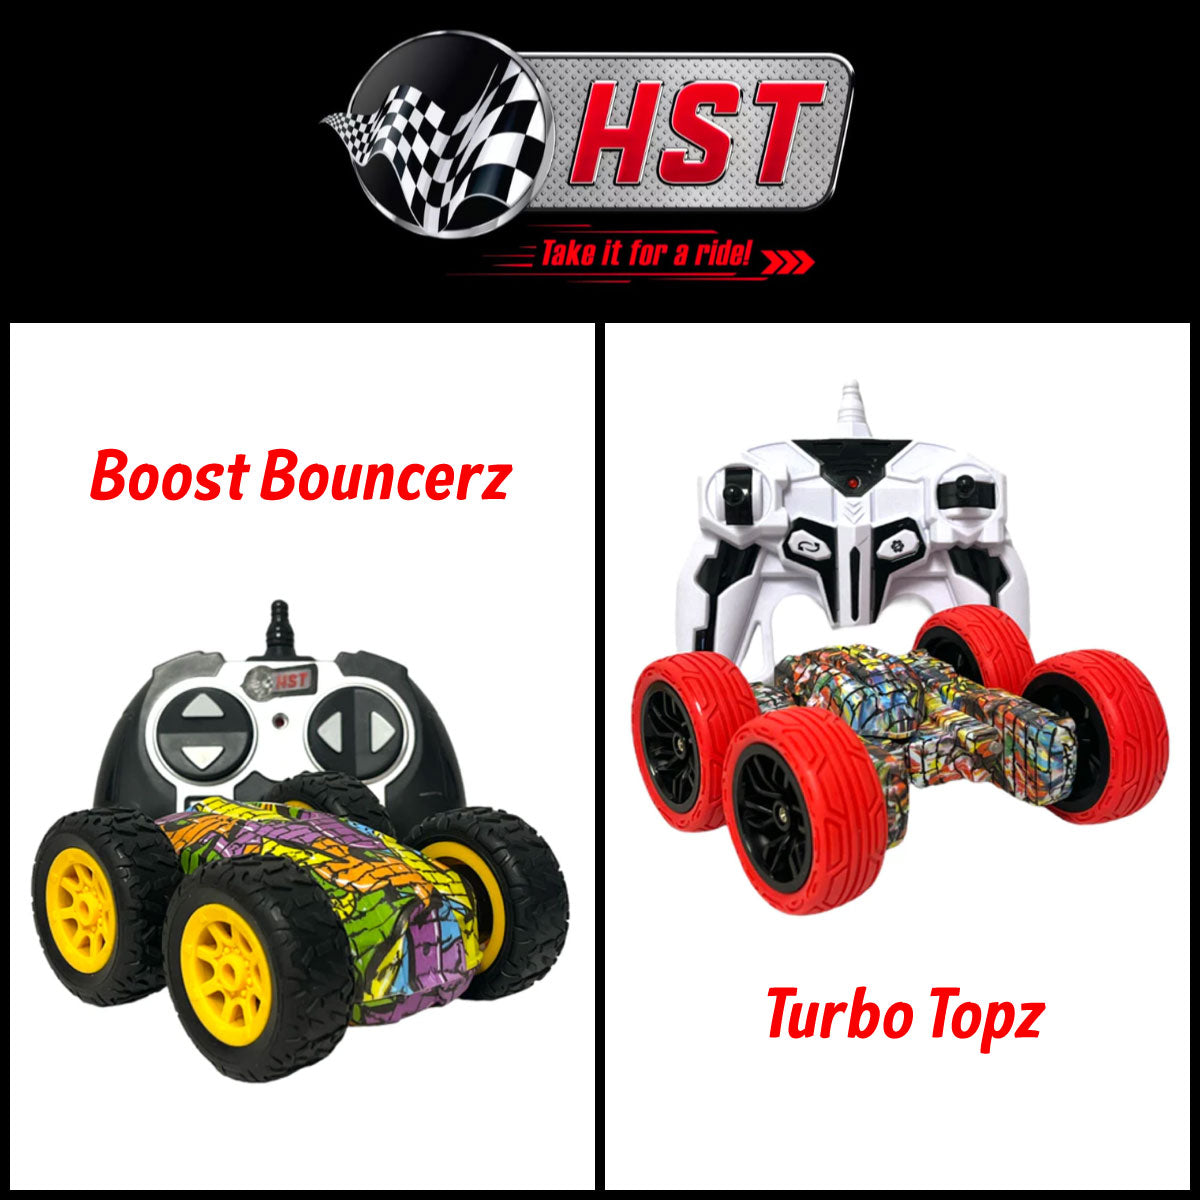 HST-US WildStyle RC Stunt Cars Boost Bouncerz and Turbo Topz